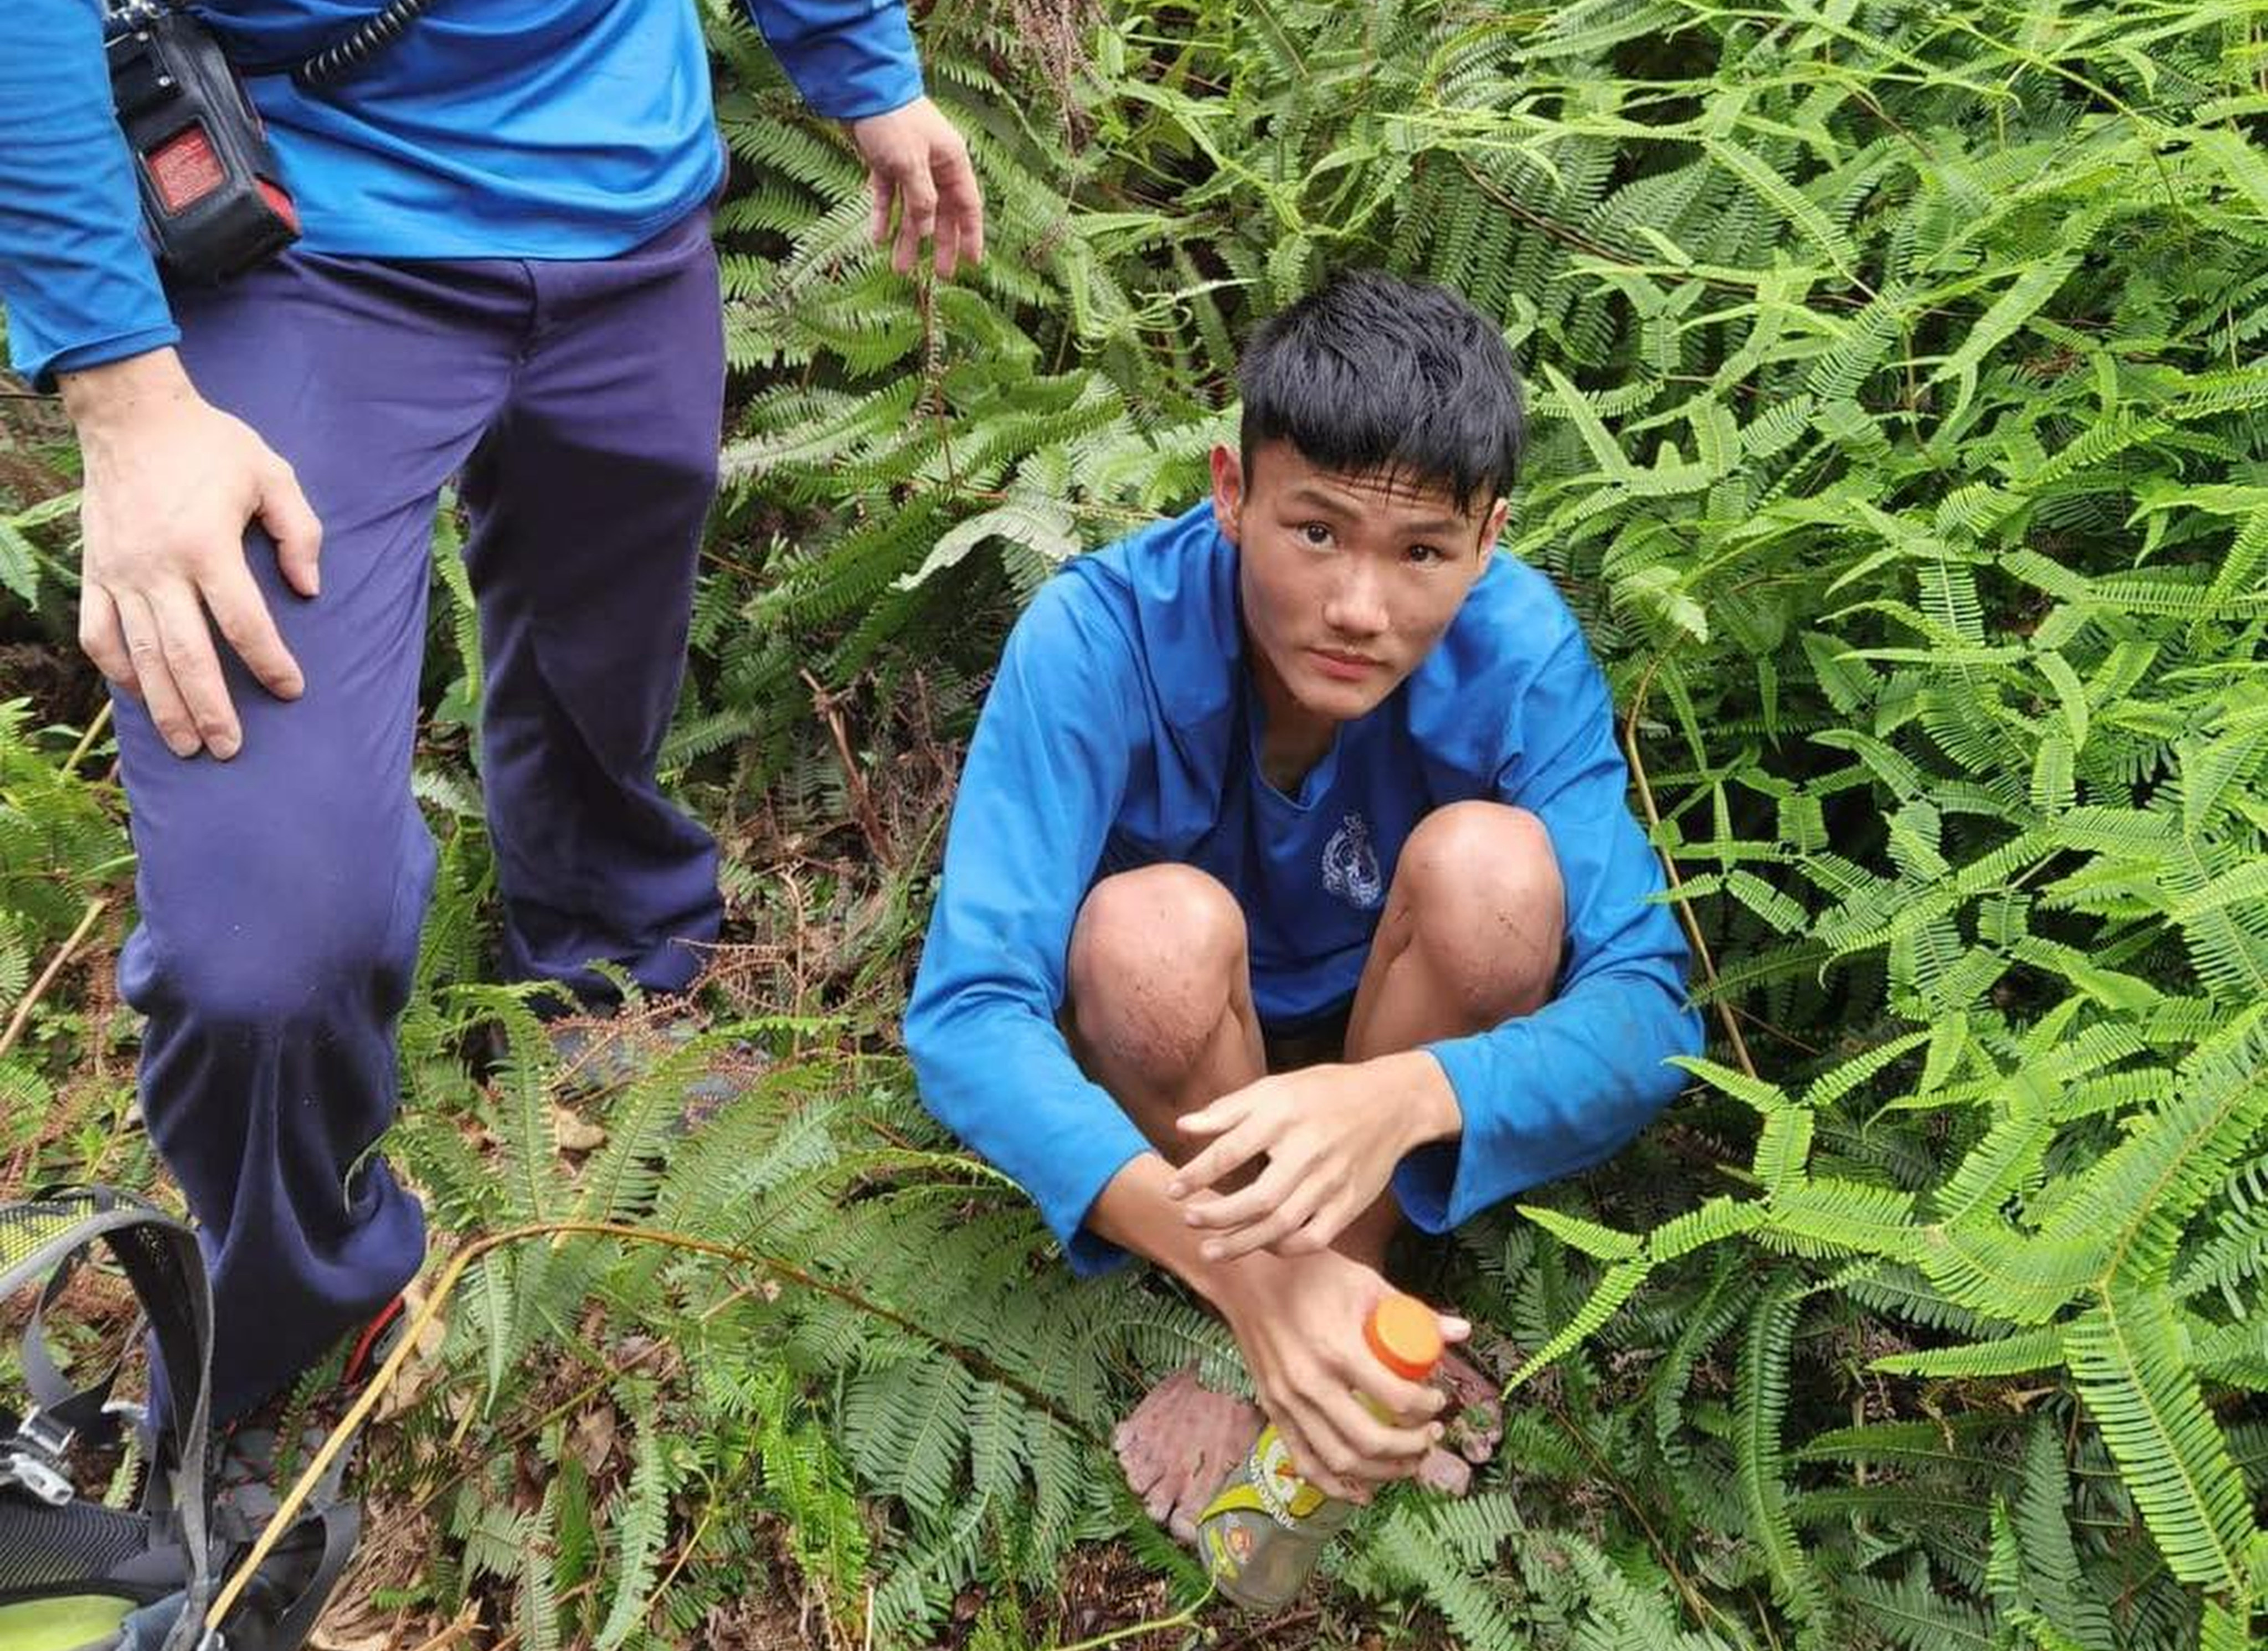 Missing Matthew Chan after he was found on Wednesday in a country park after being missing for seven days. Photo: Handout